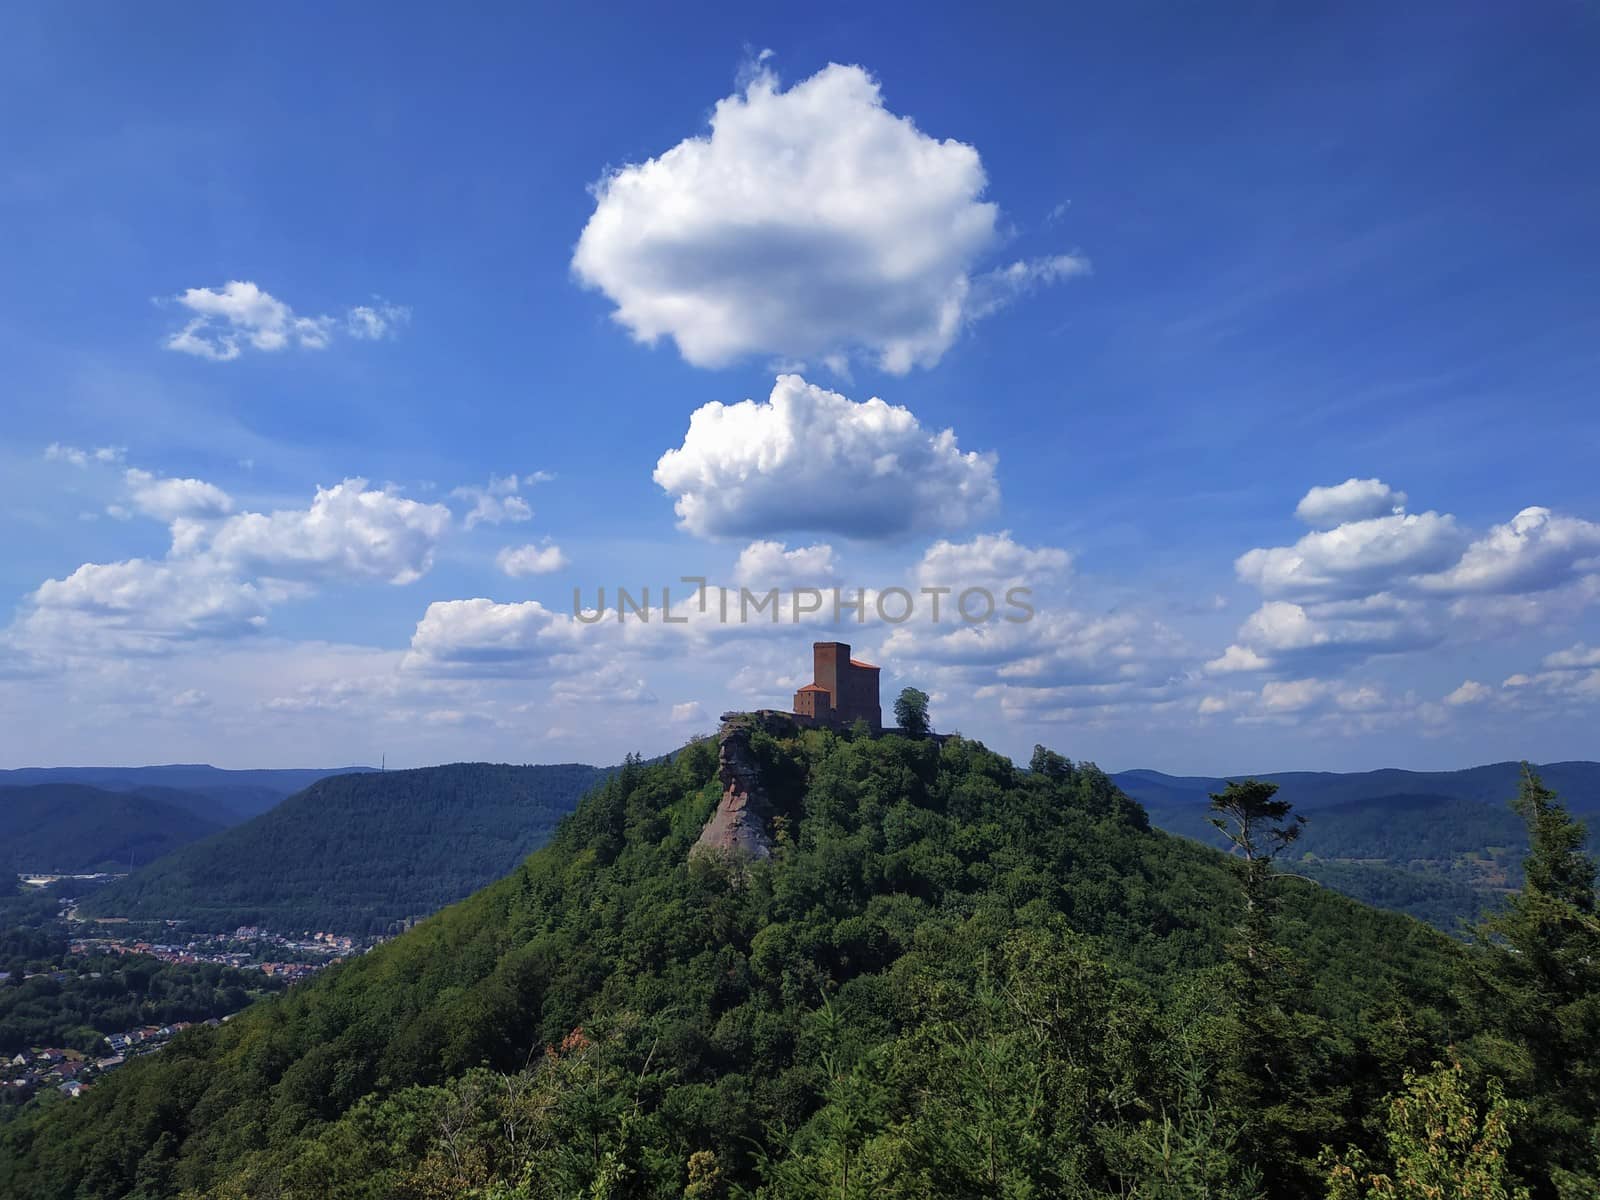 Interesting cloud formation over Trifels castle located on hill top by pisces2386